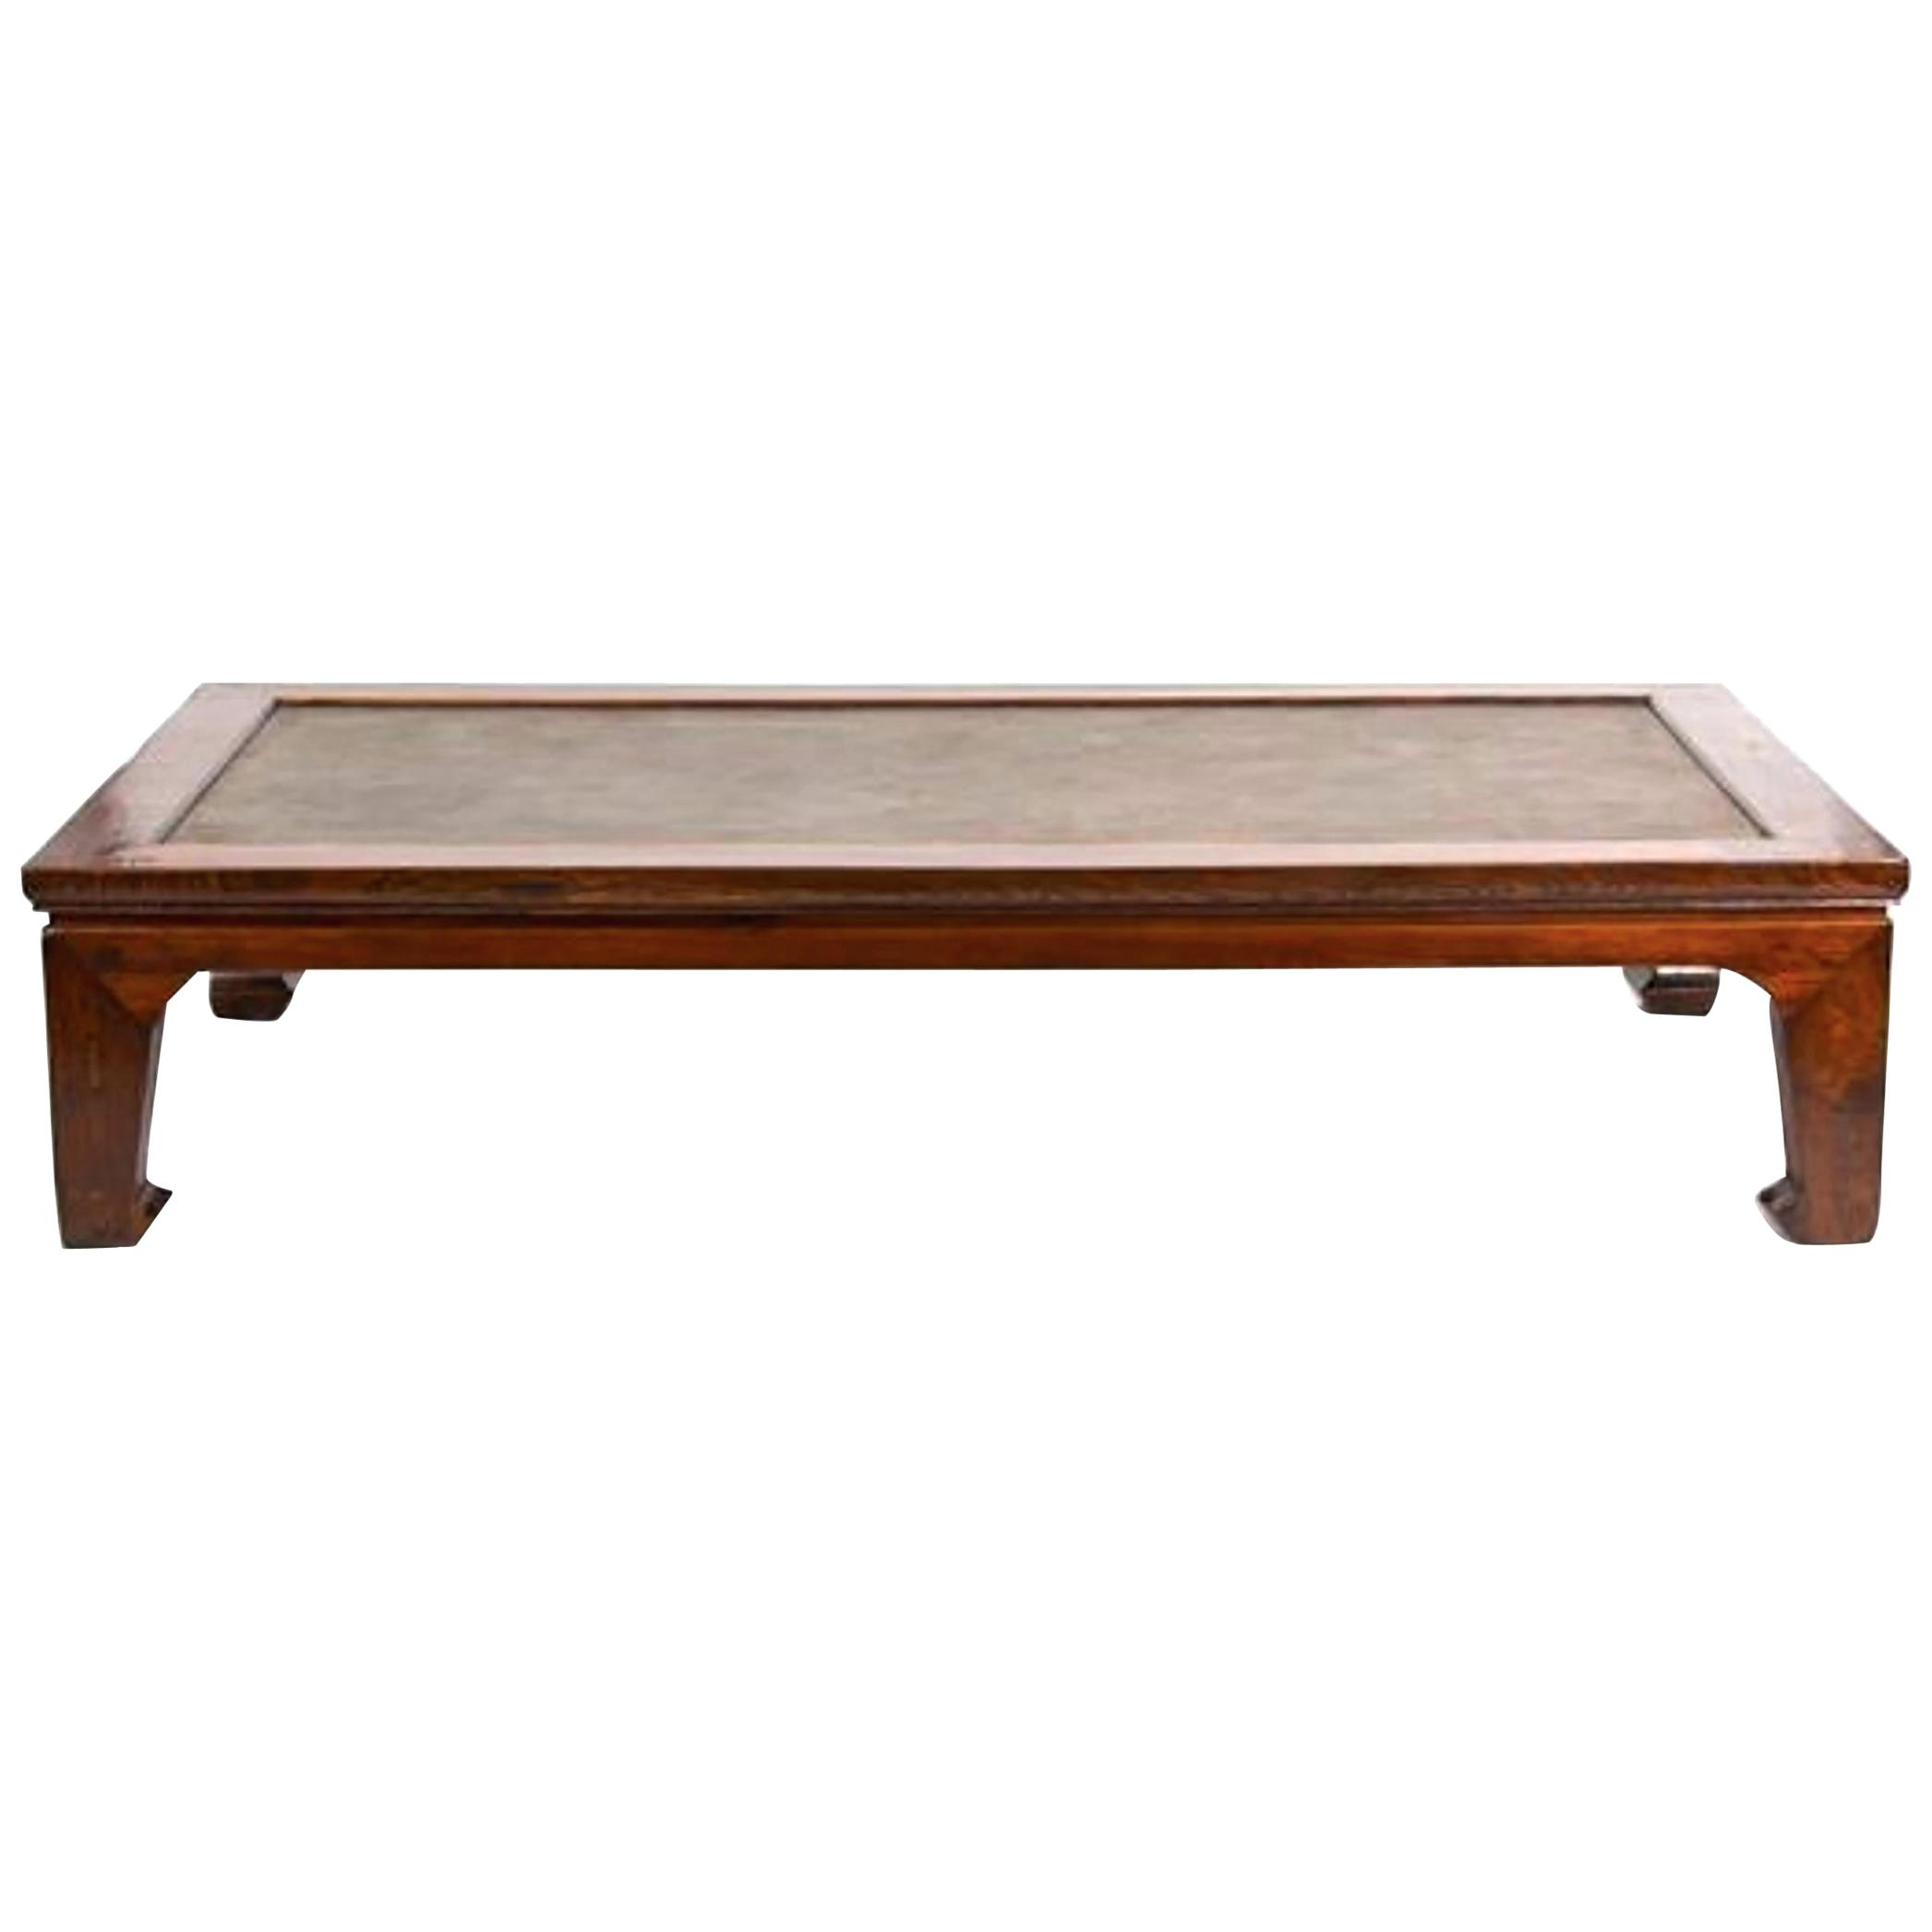 Asian Style Coffee Table End Tables Photos Table And Pillow throughout sizing 2093 X 2093